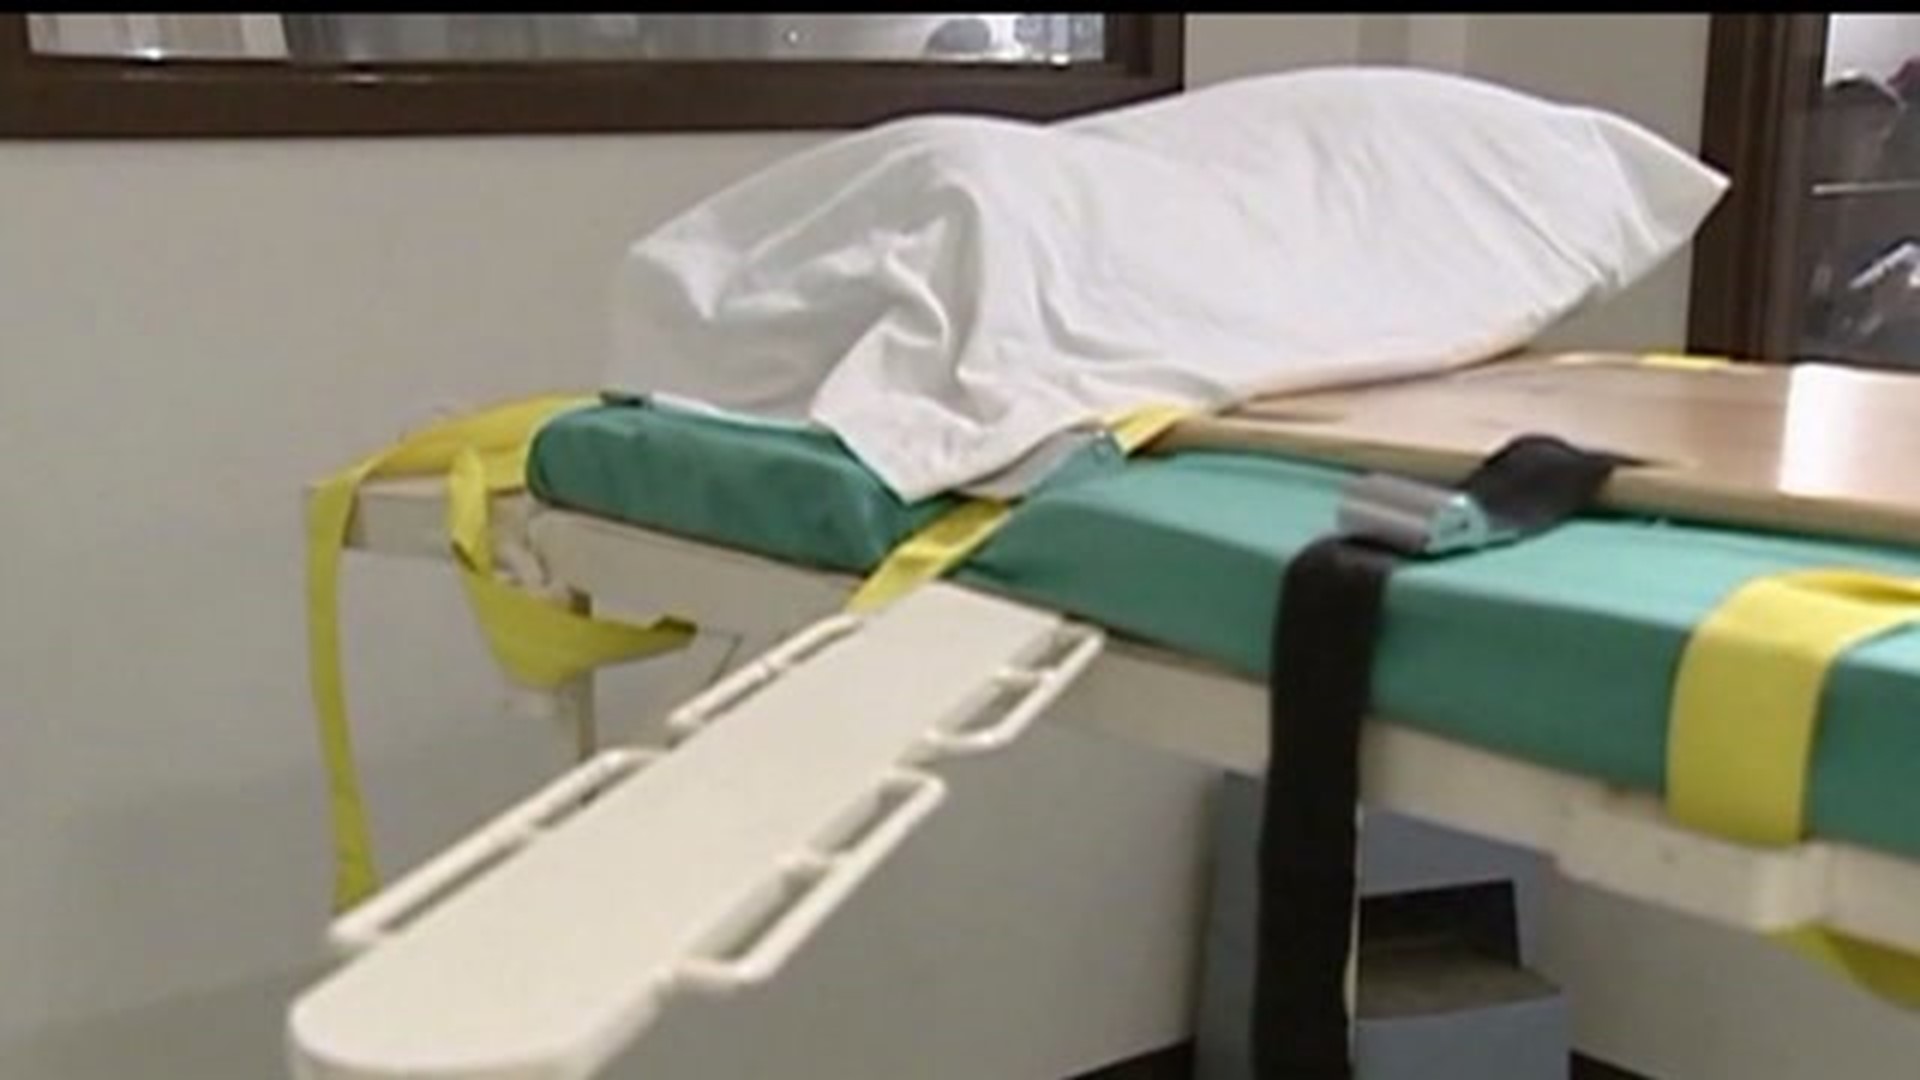 Governor Tom Wolf Instates Moratorium on Death Penalty